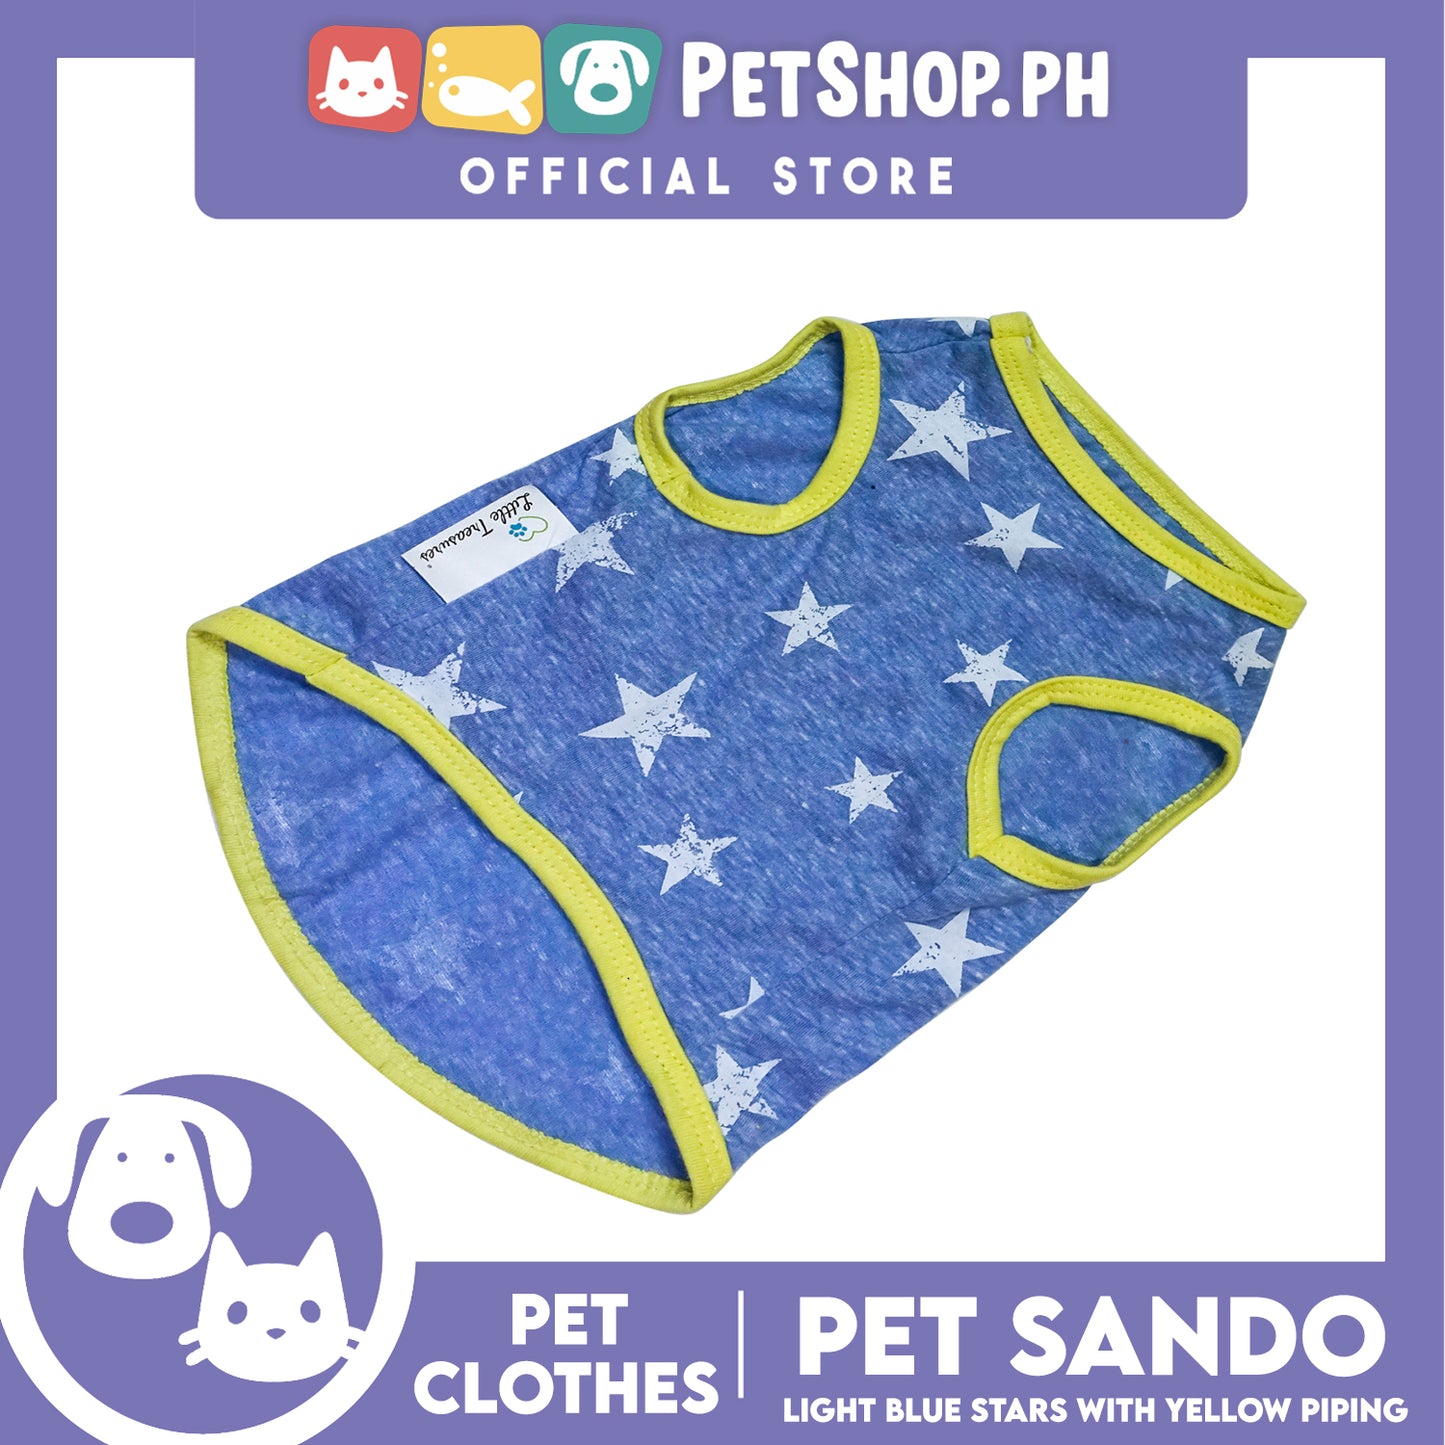 Pet Sando Light Blue Stars with Yellow Piping (Extra Large)  Pet Shirt Clothes Perfect fit for Dogs